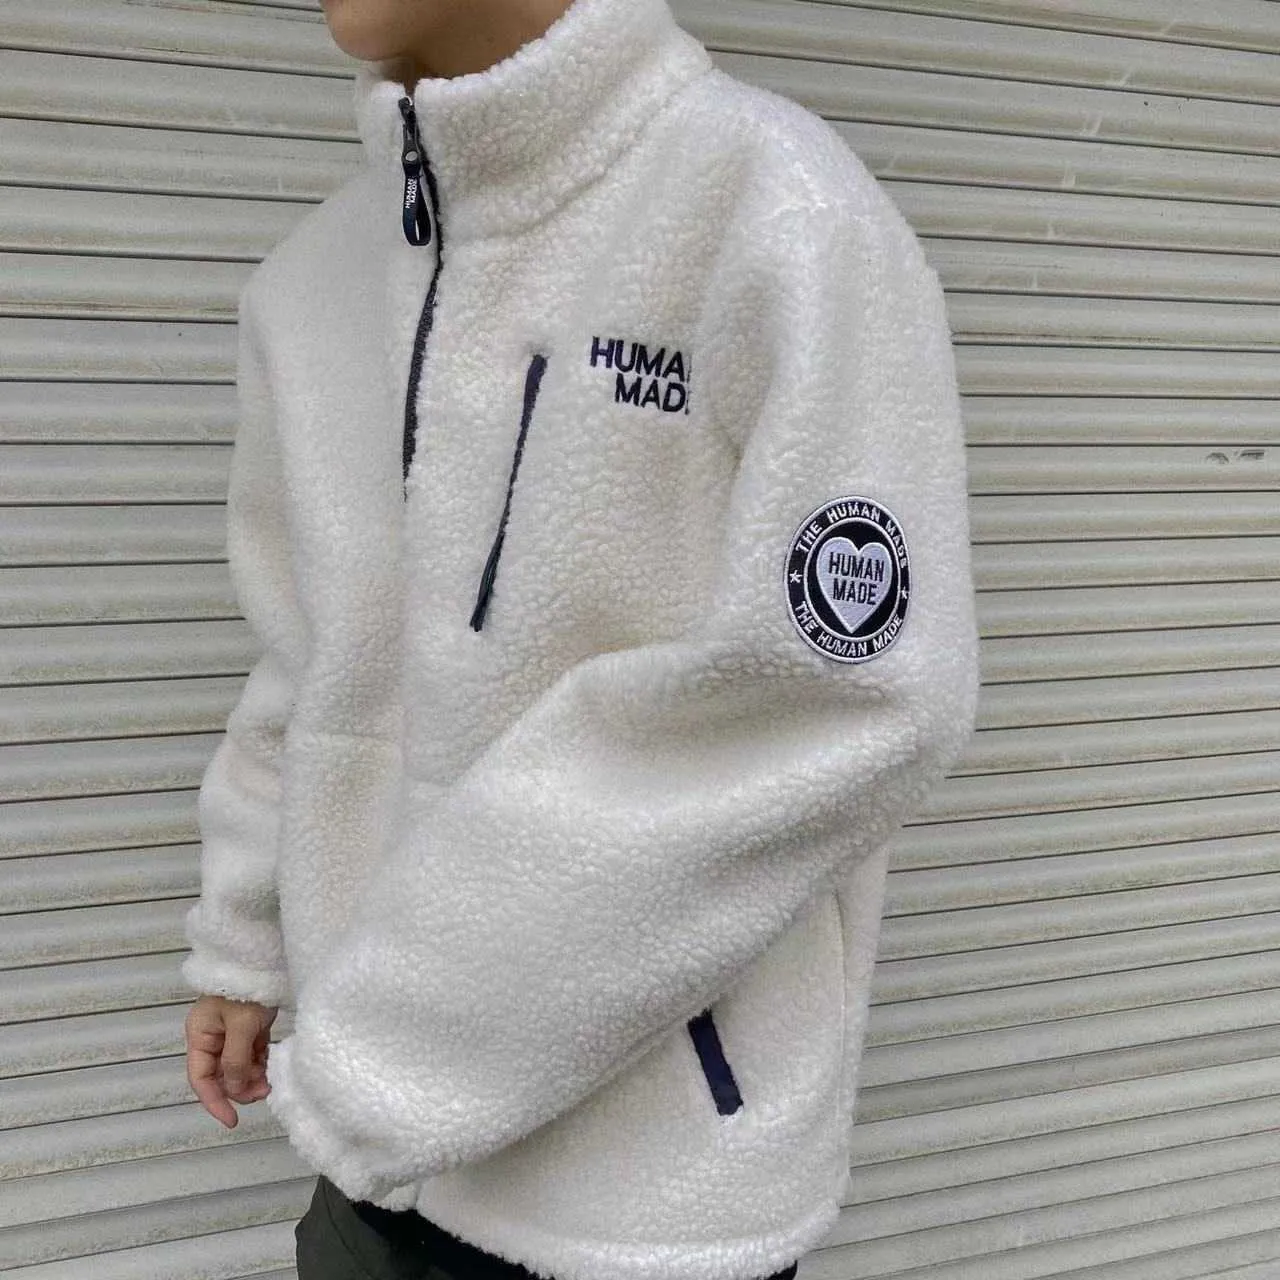 Human made lamb coat thickened jacket stand collar embroidered letters love four-color men and women